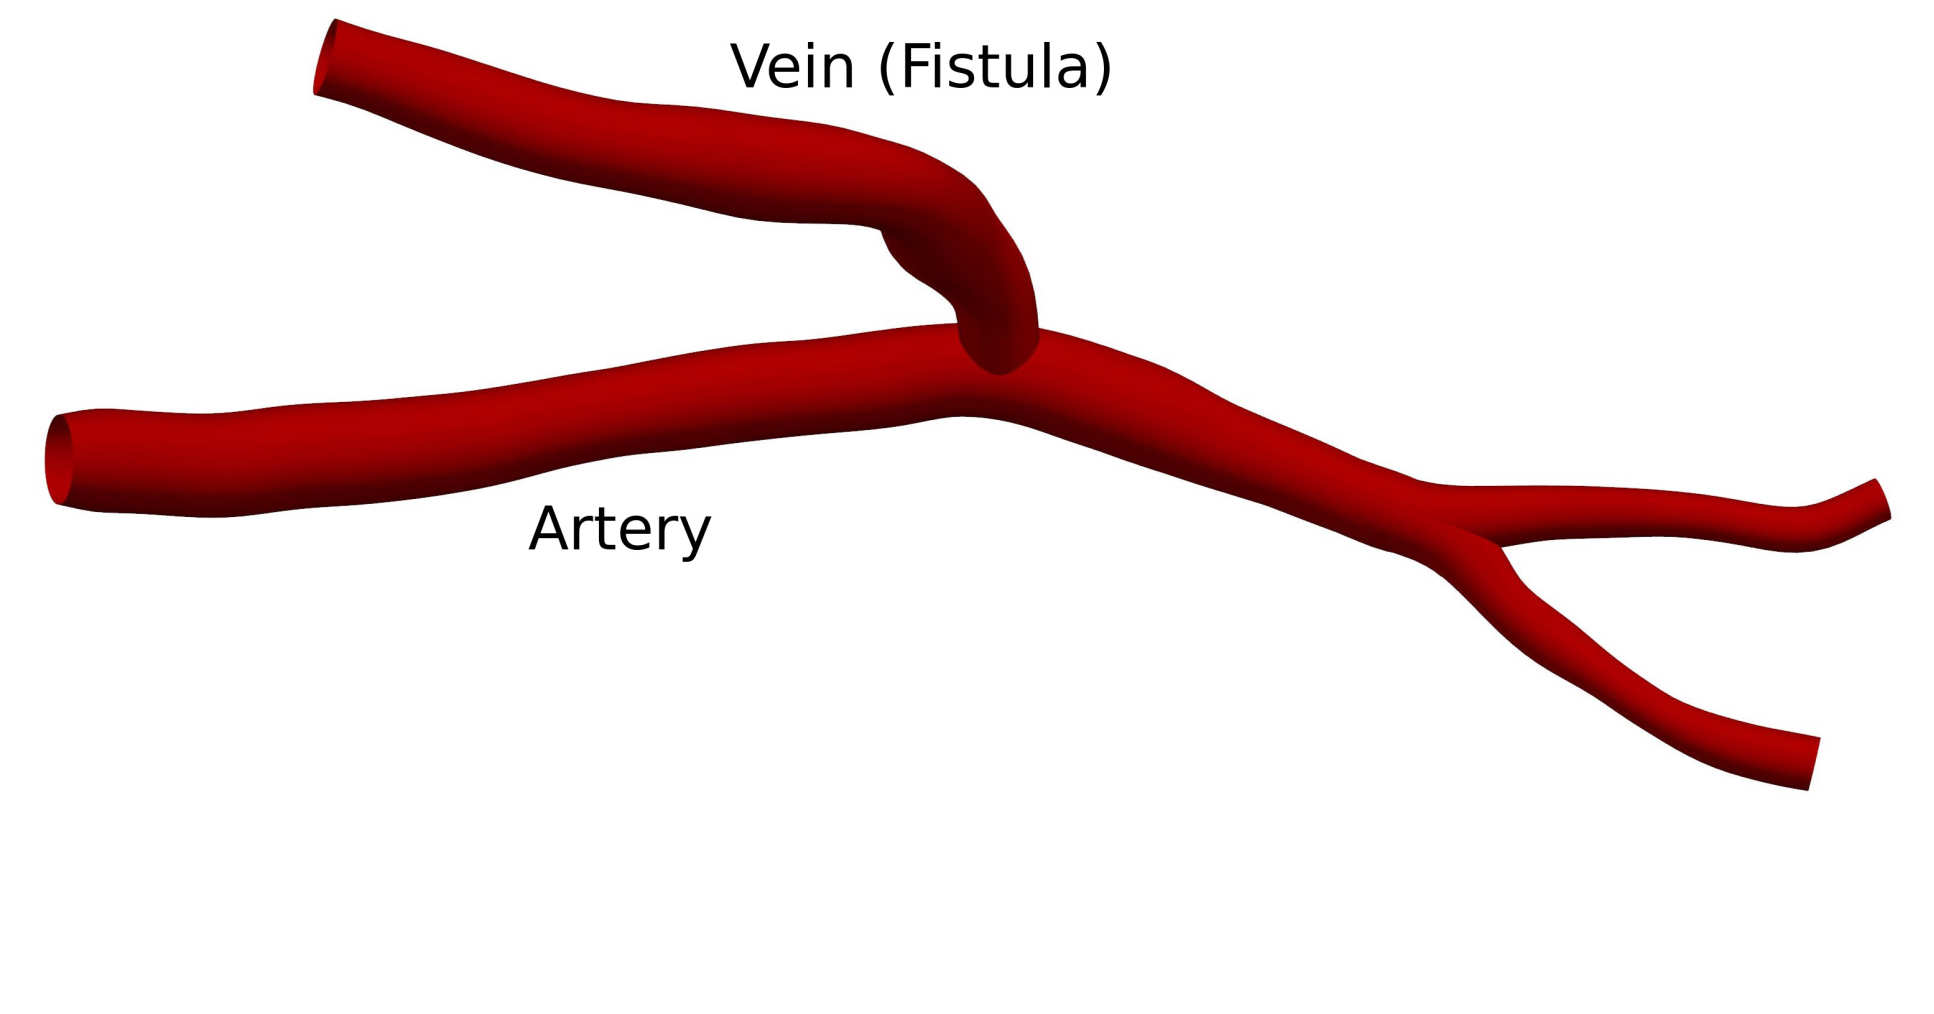 3D rendering of AVF with labels showing vein and artery